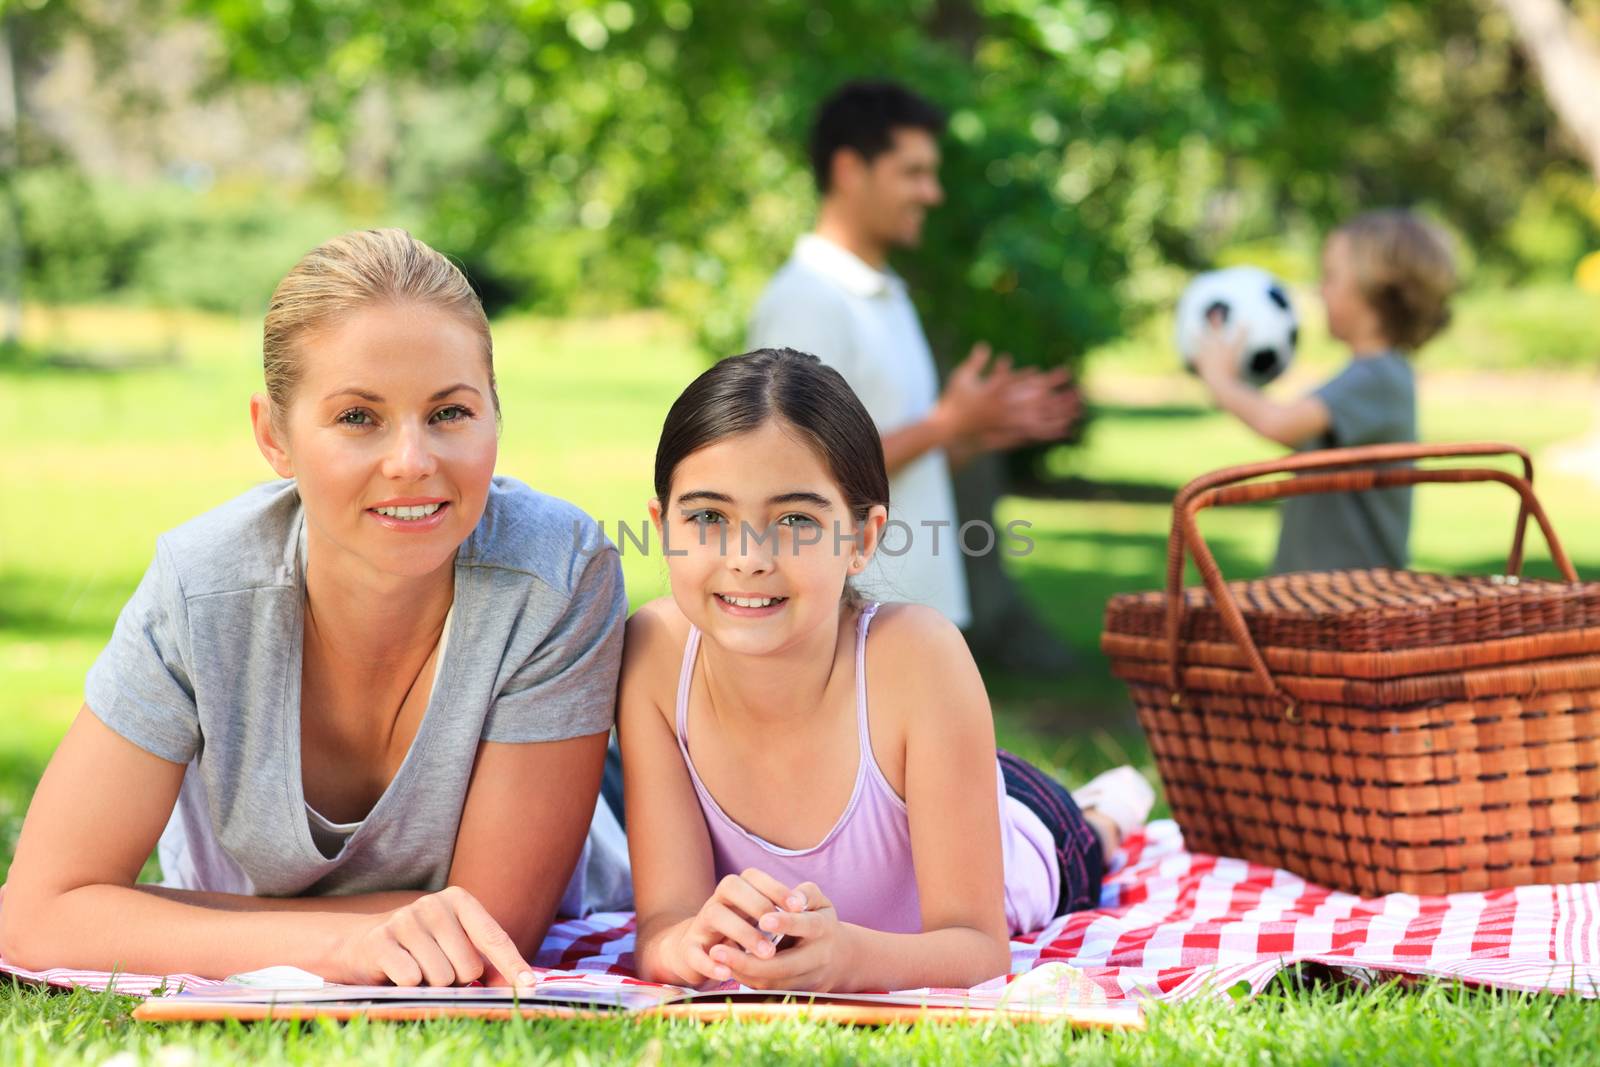 Family picnicking in the park during the summer